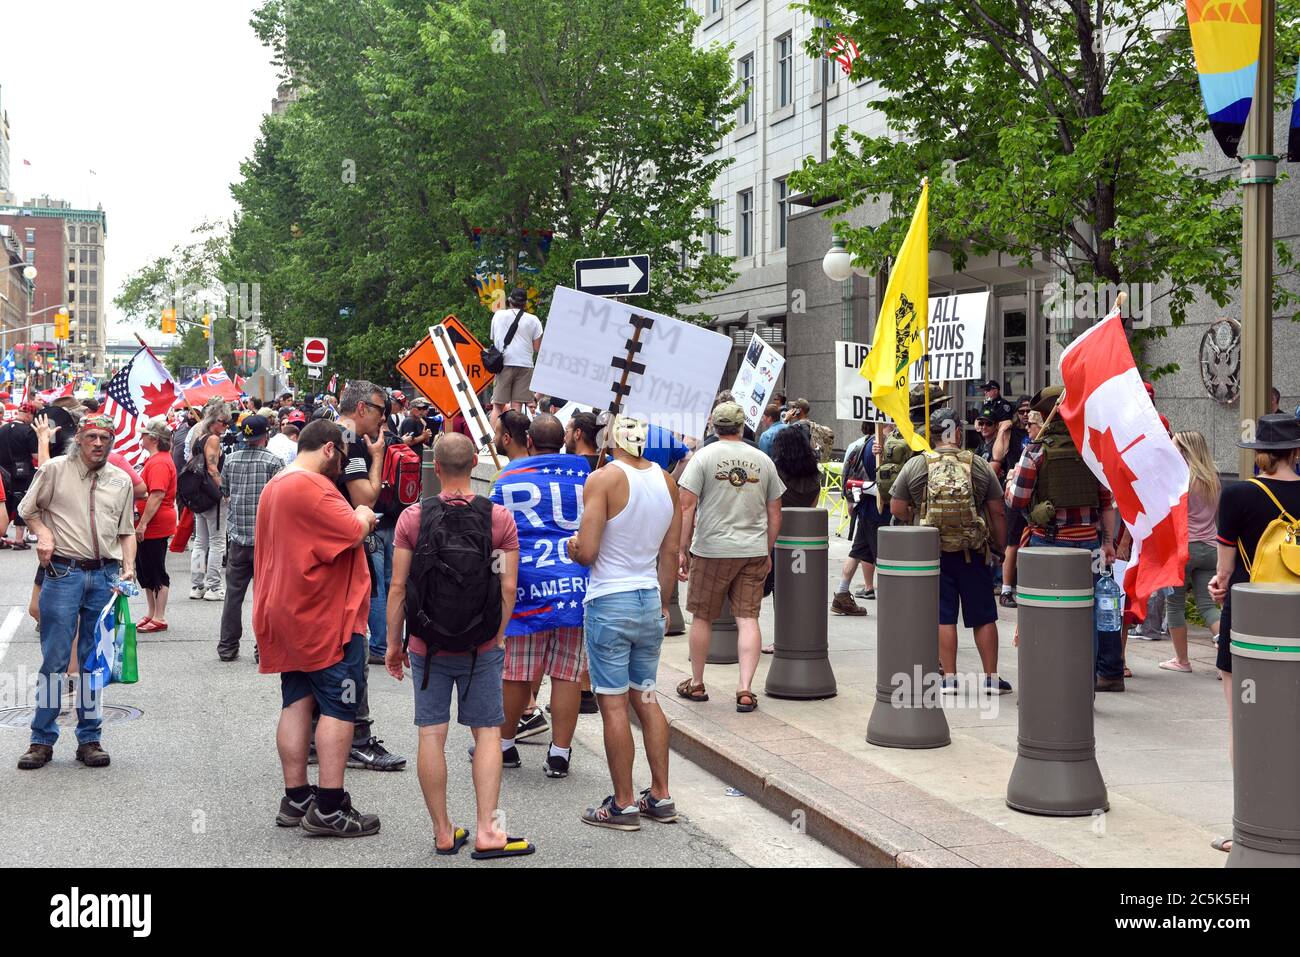 Ottawa, Canada - July 1, 2020: Right wing, pro-gun and covid lockdown protesters protest in front of the US Embassy. The annual Canada Day festivities were cancelled due to the Coronavirus pandemic so many used the opportunity to protest their causes on Parliament Hill and the Embassy. Stock Photo